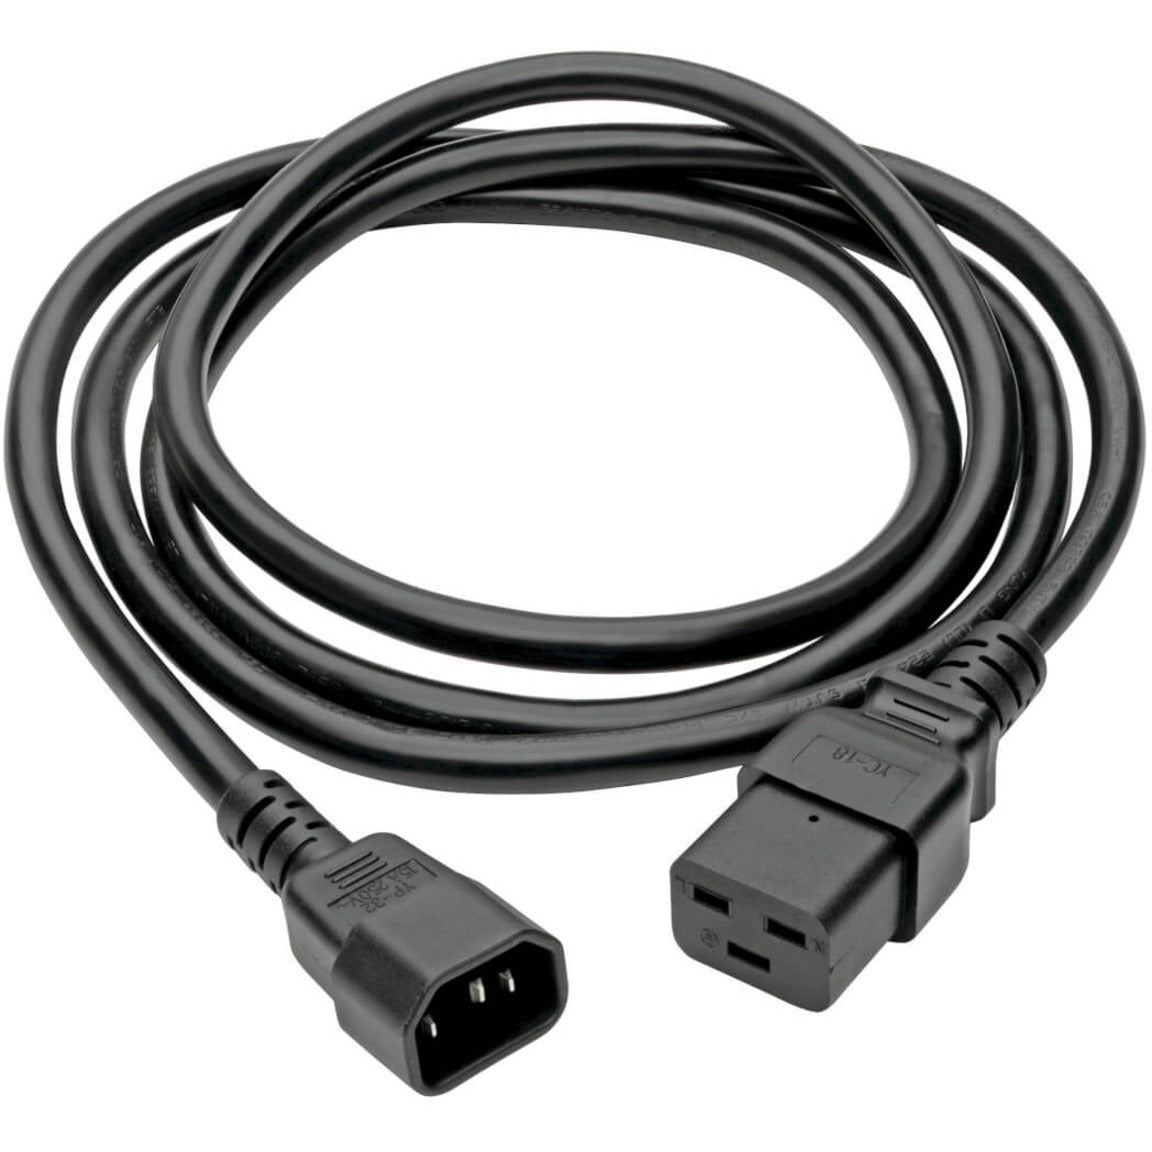 Tripp Lite P047-010 Power Interconnect Cable, 10 ft, 15A 250V AC